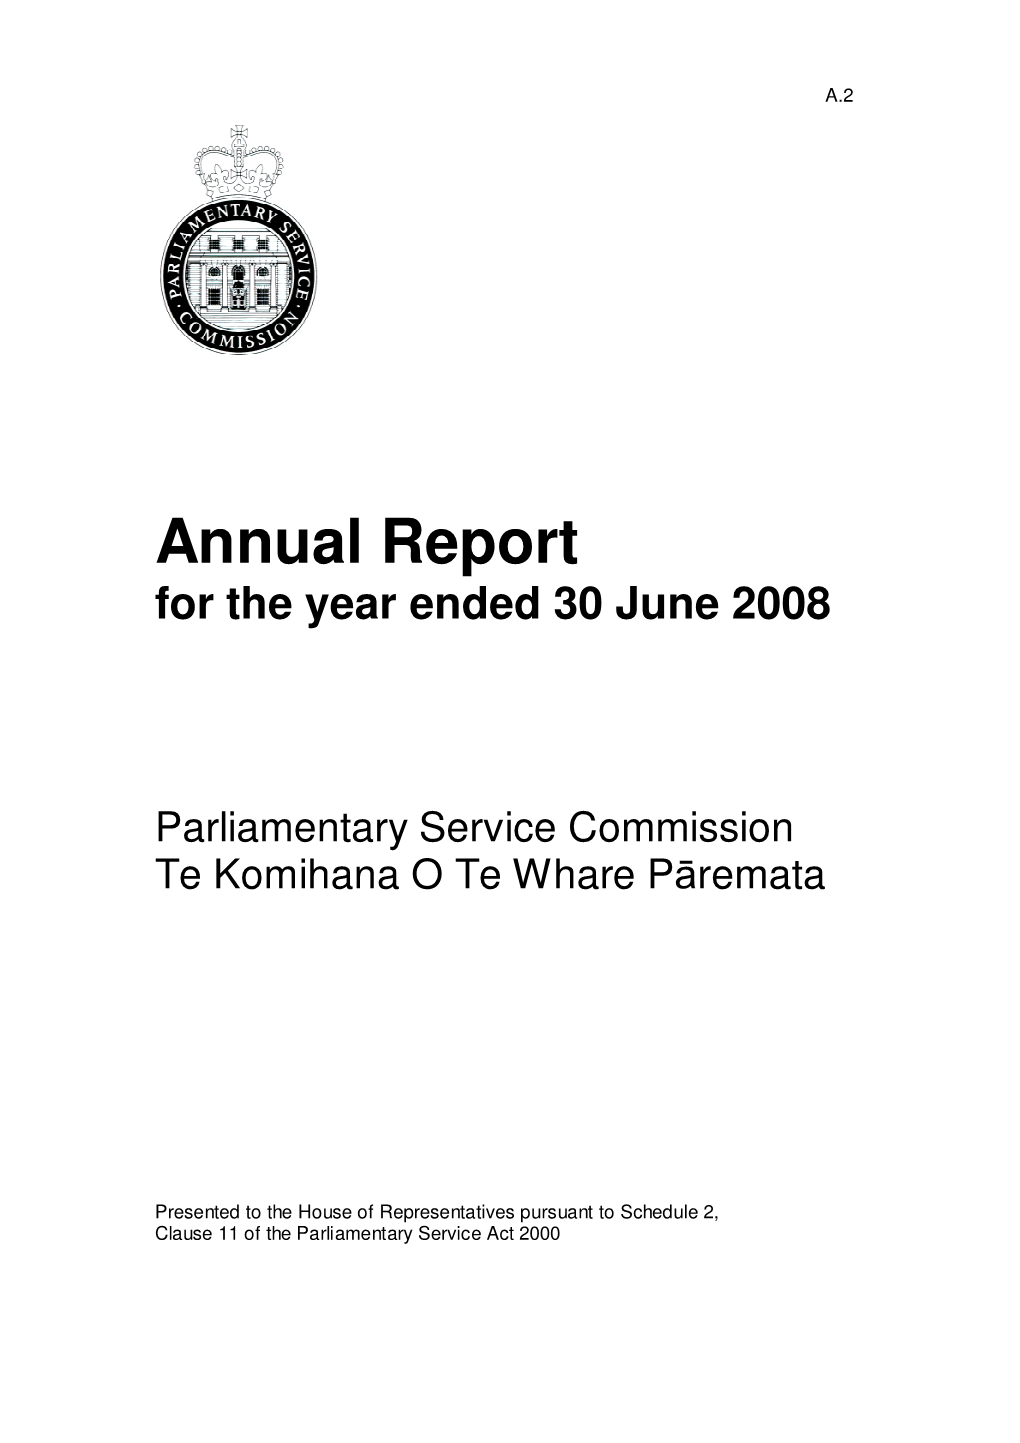 Annual Report for the Year Ended 30 June 2008